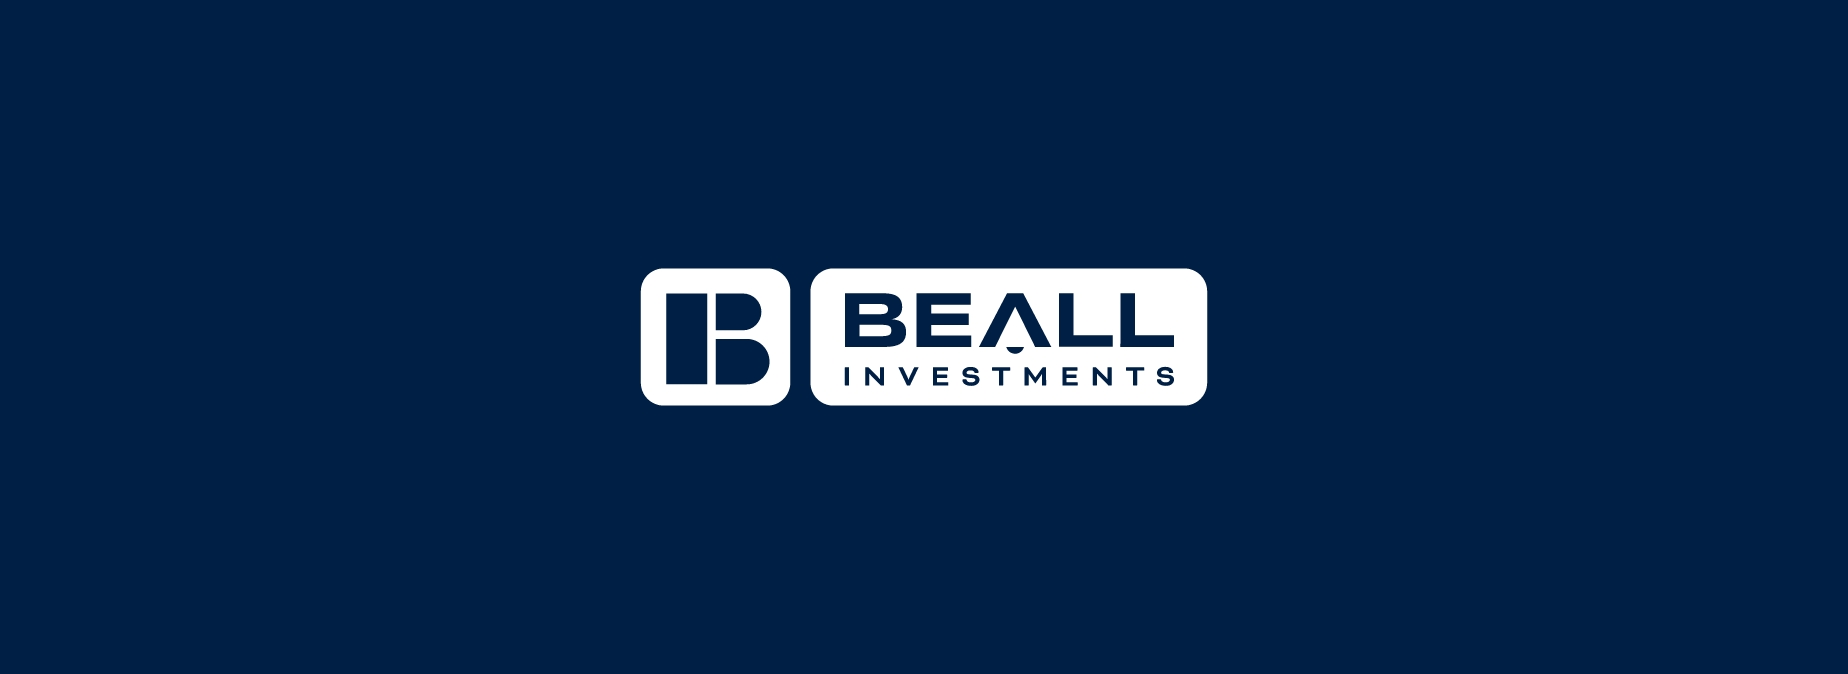 Beall Investment Logo Section